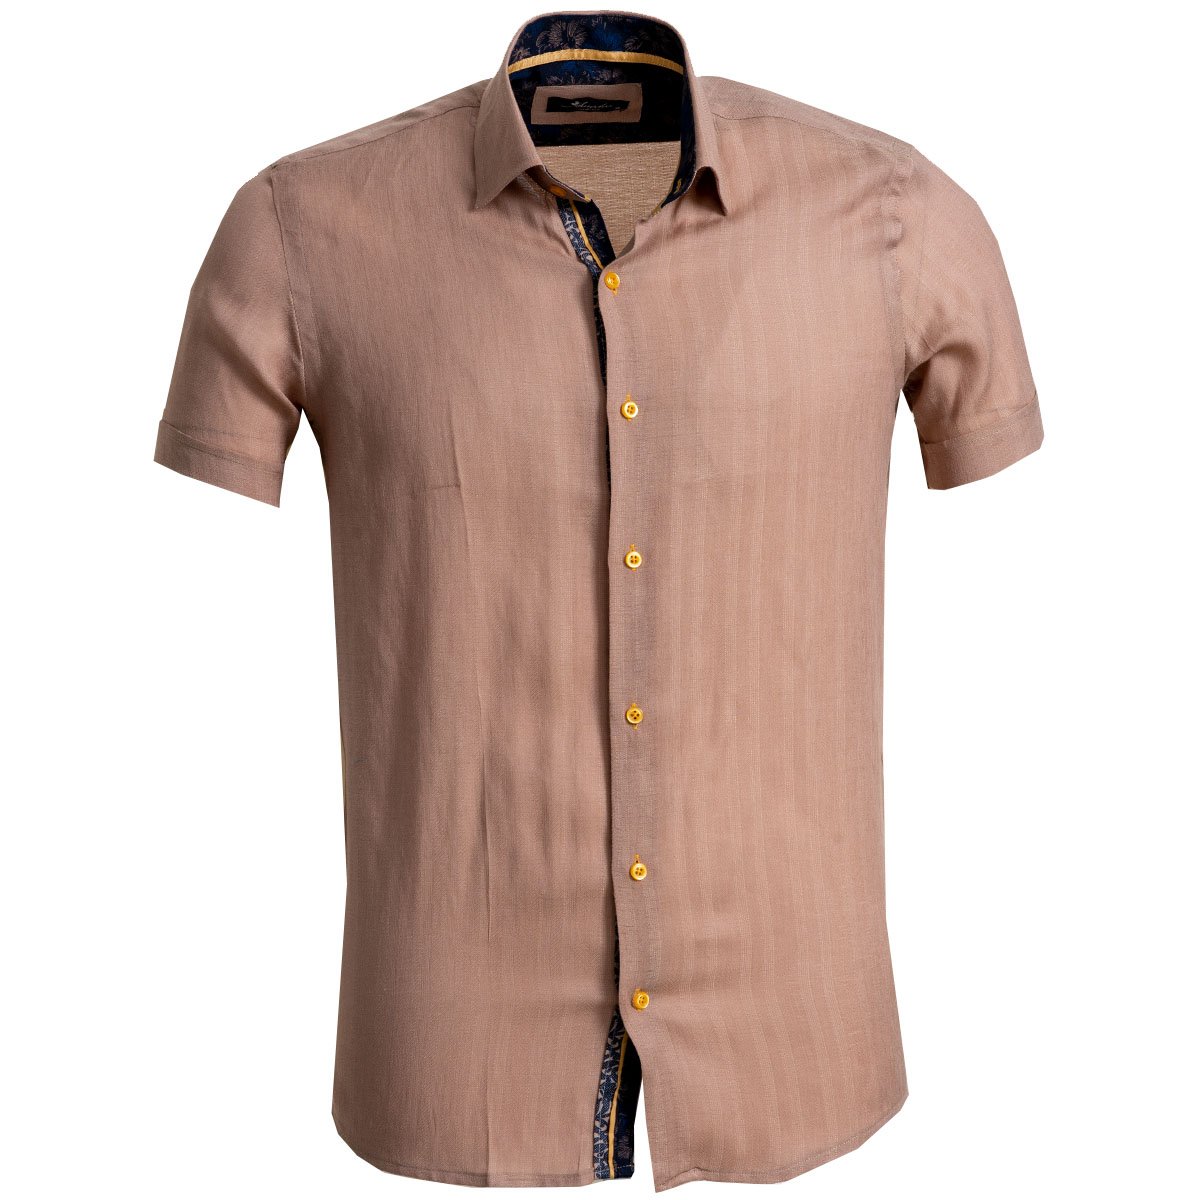 Men's Button down Tailor Fit Soft 100% Cotton Short Sleeve Dress Shirt Solid Light Brown casual And Formal - Amedeo Exclusive